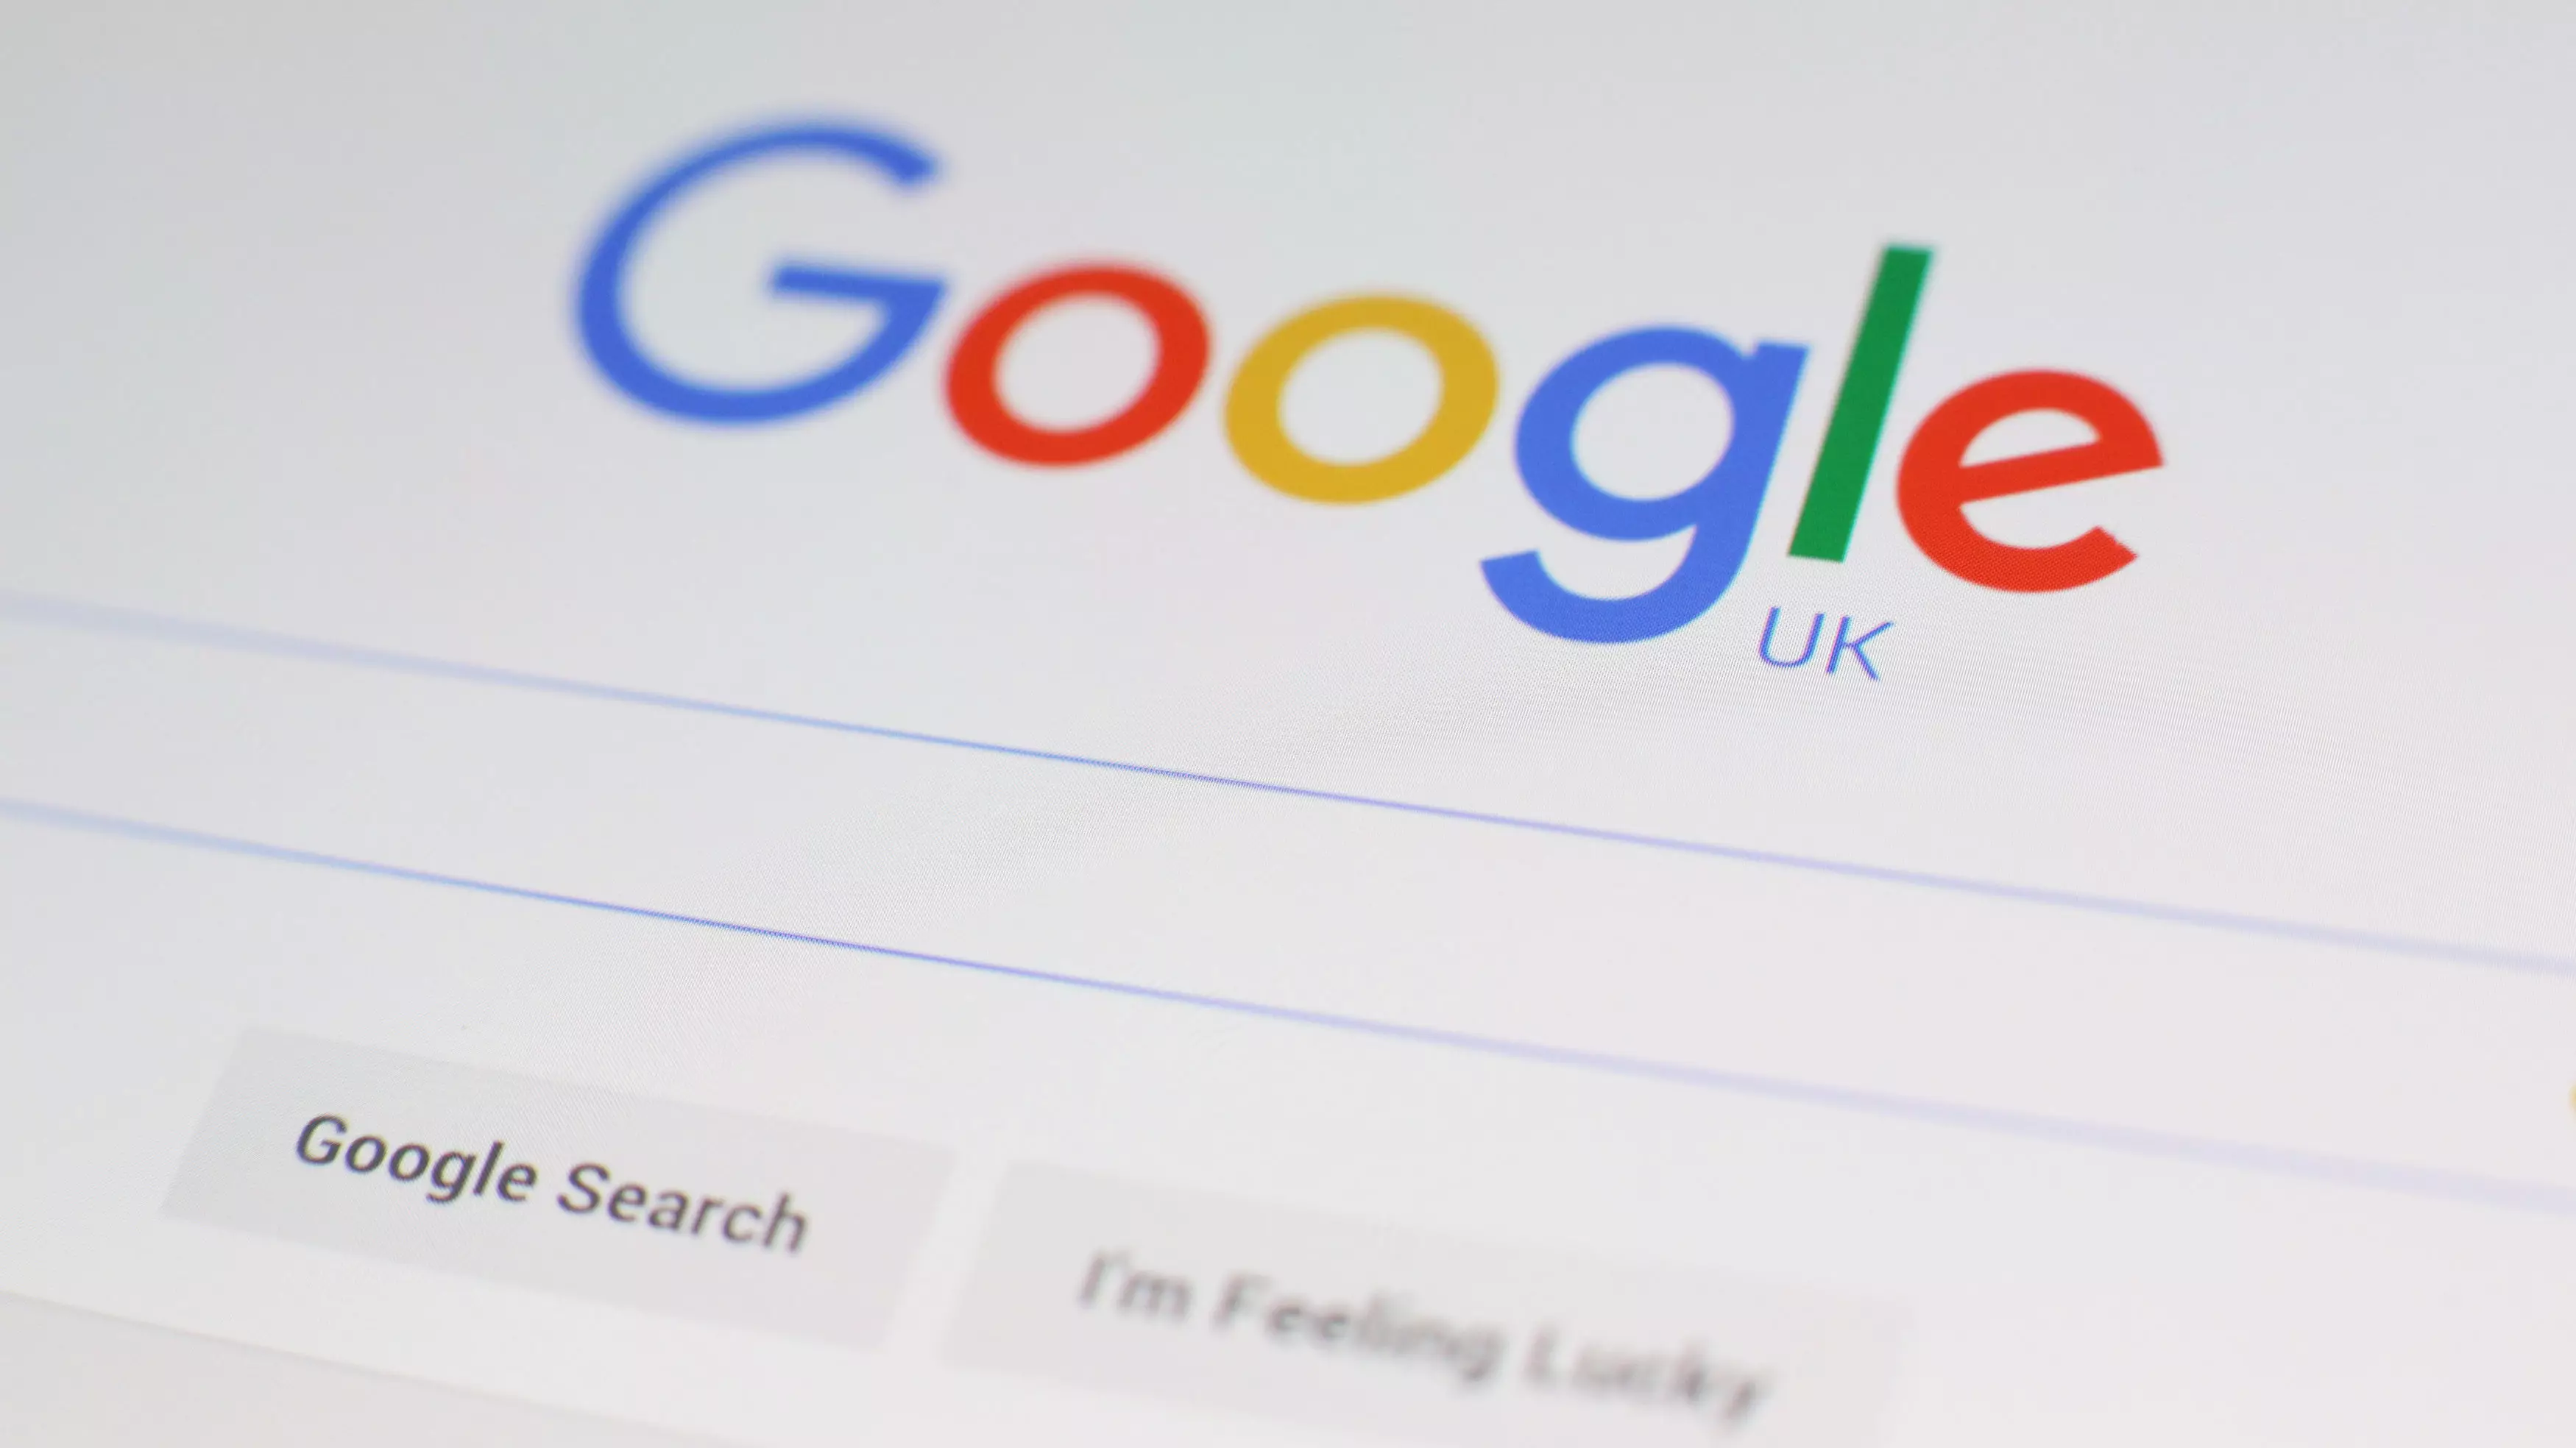 Google Warns Users About 'Sophisticated' Phishing Scam 